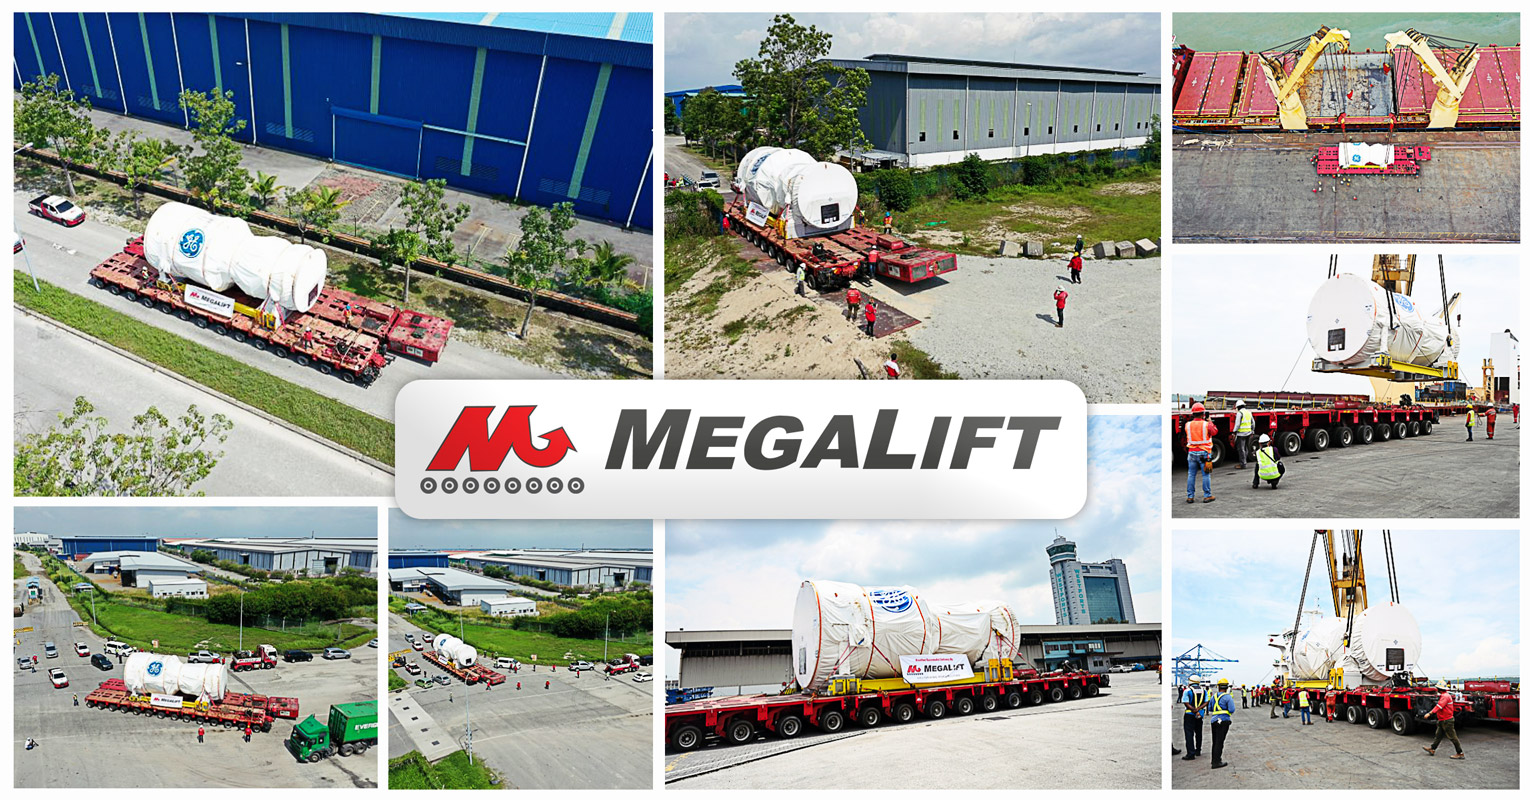 Megalift Received & Delivered the First Gas Turbine Unit for Pulau Indah Power Plant from Port Klang to the Site